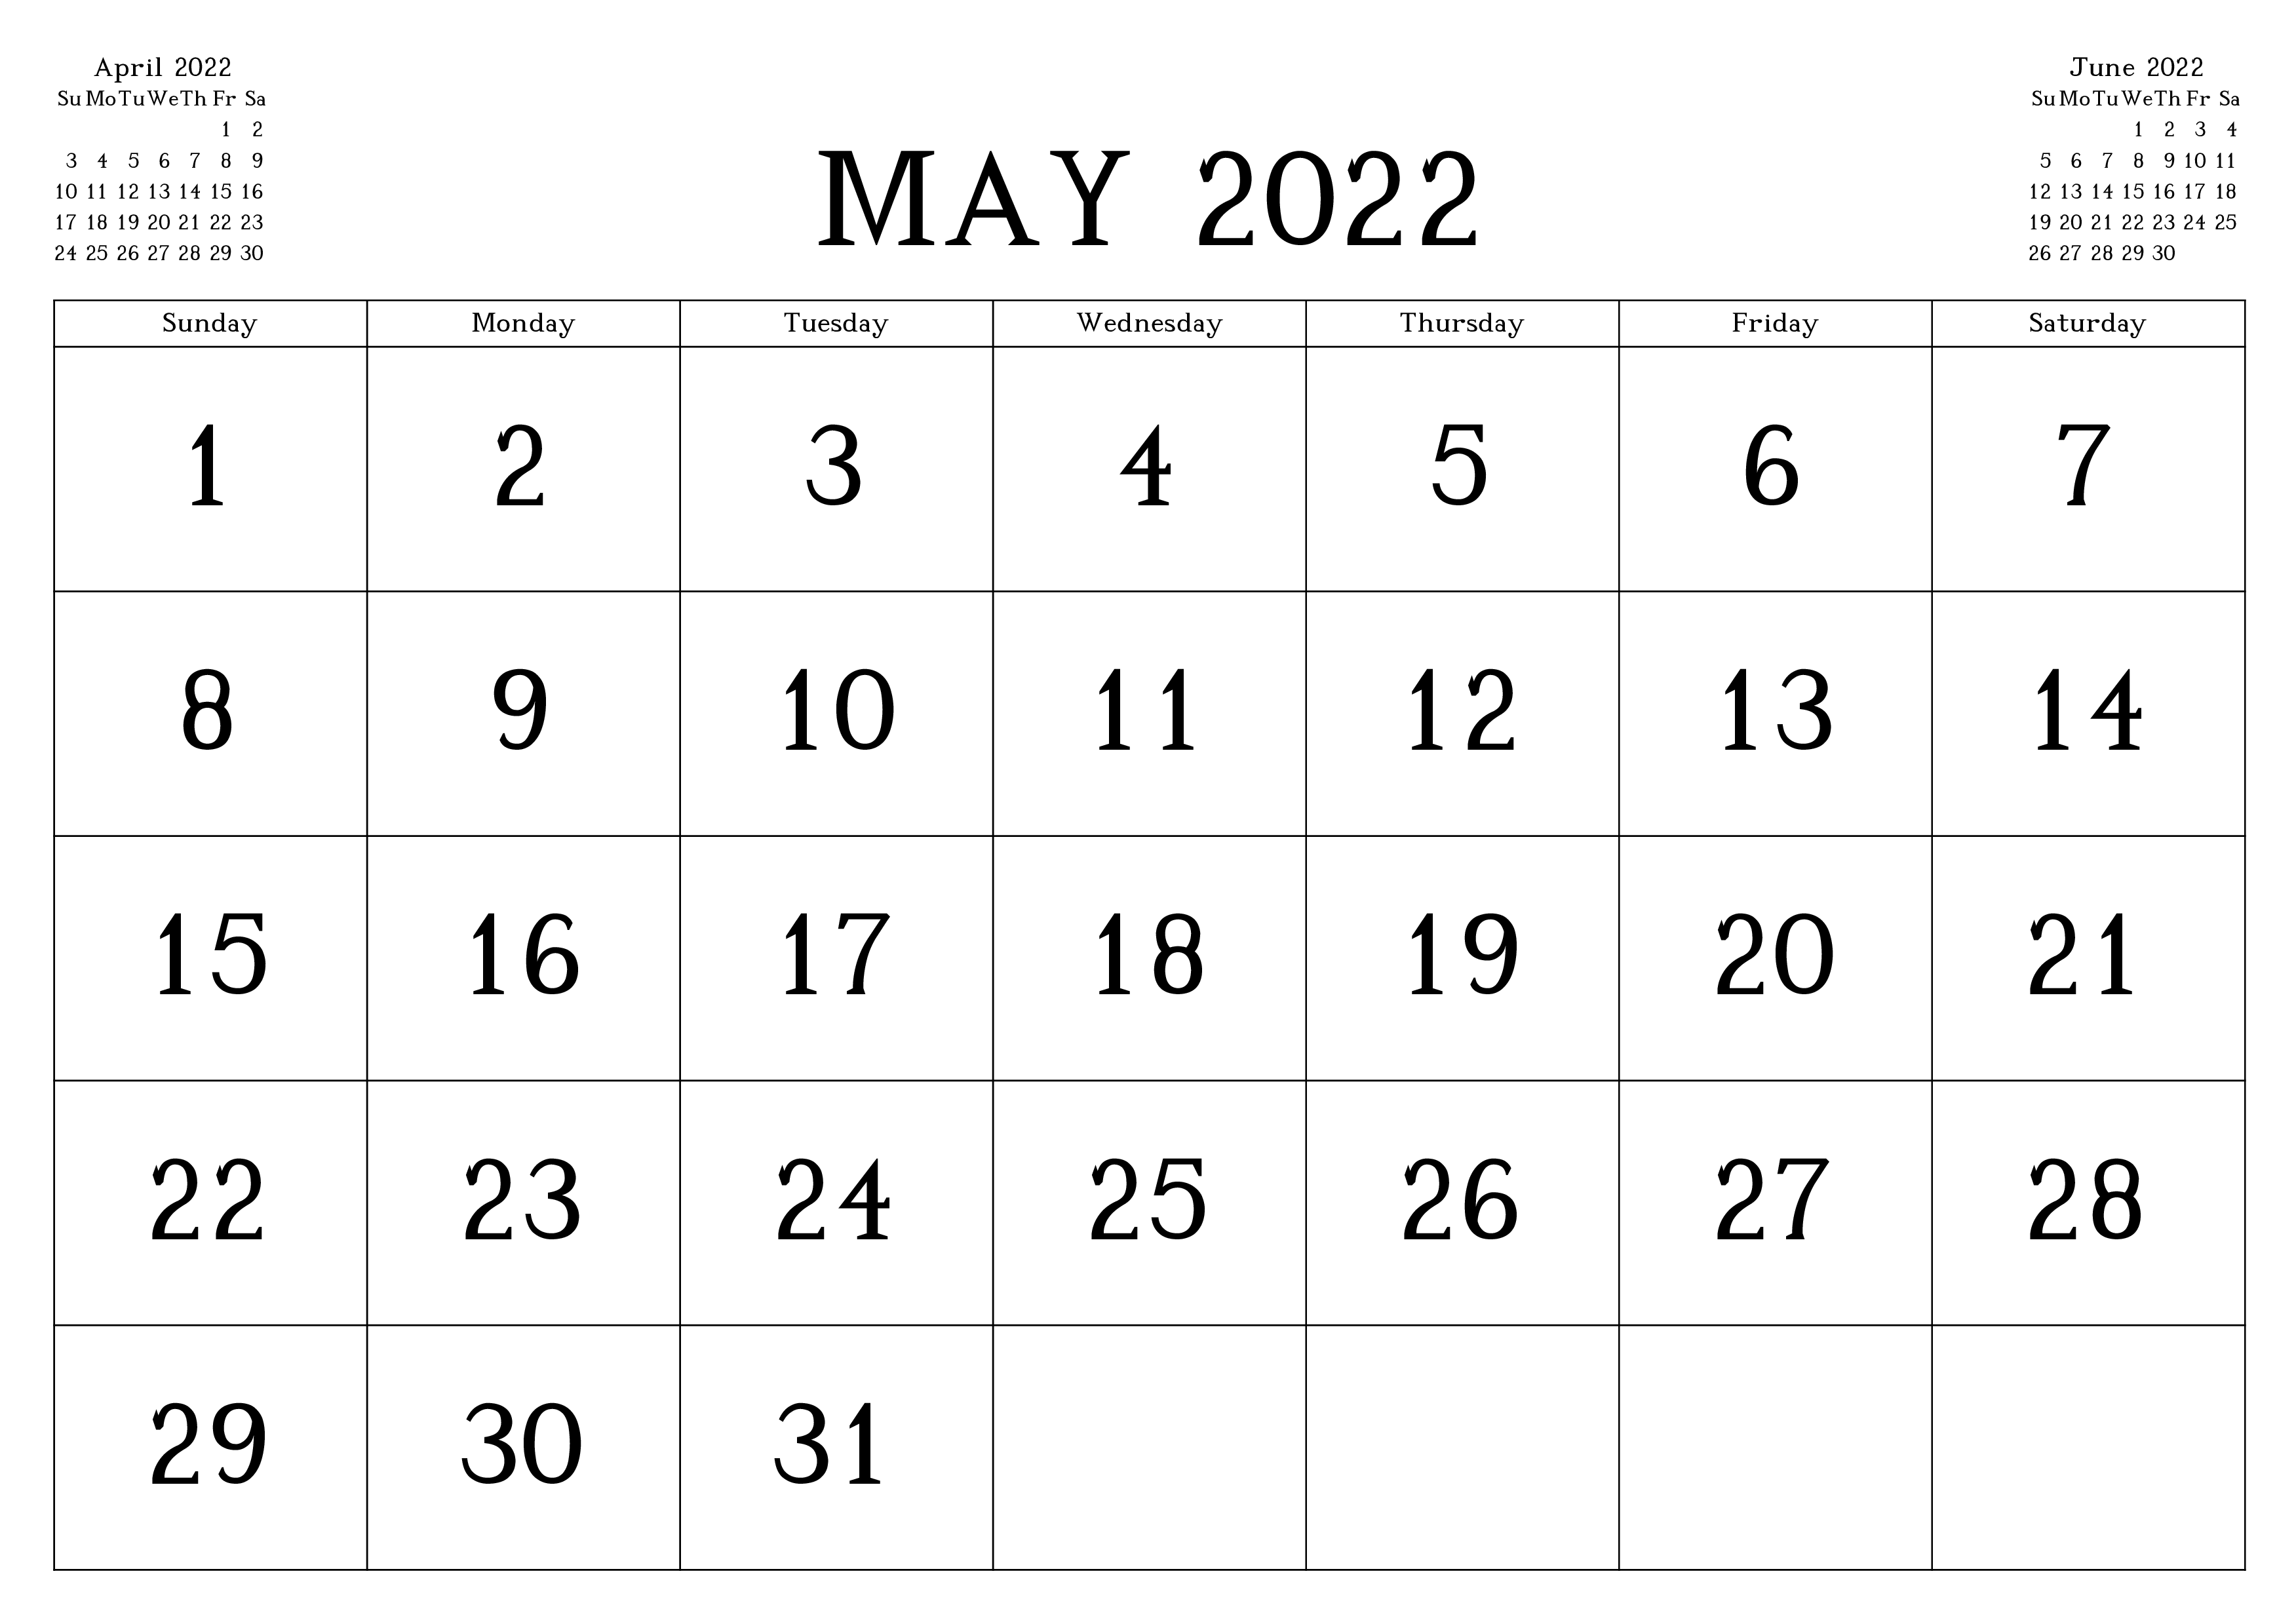 2022 may calendar template excel